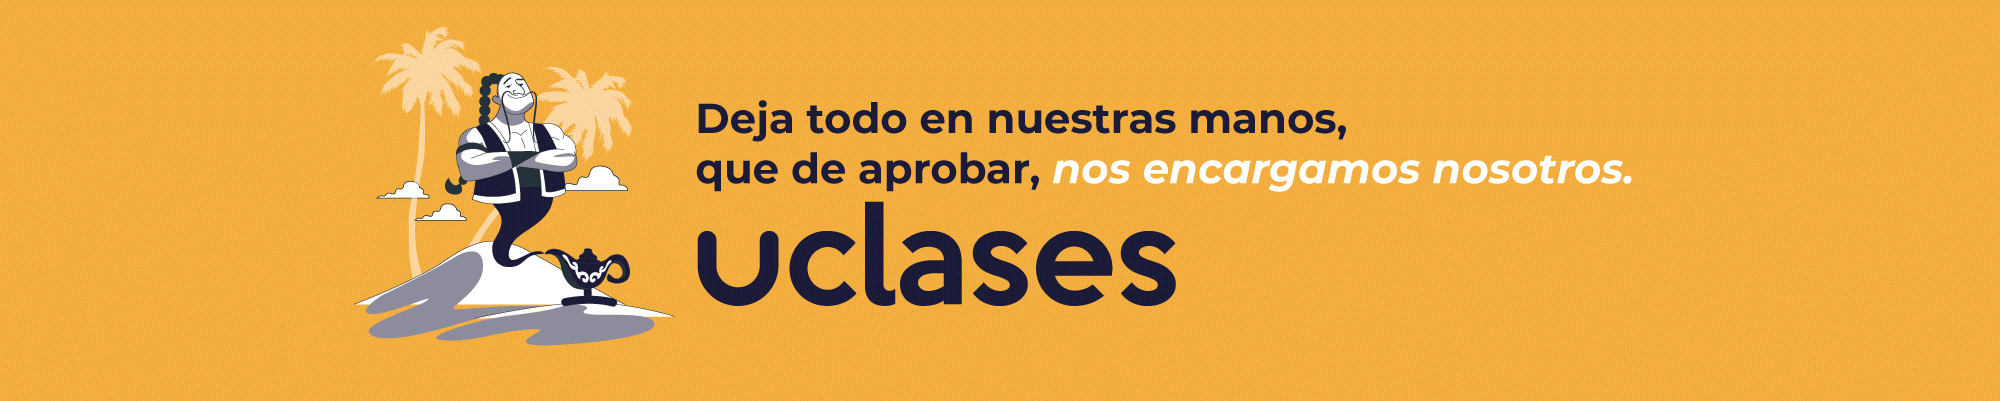 clases particulares online